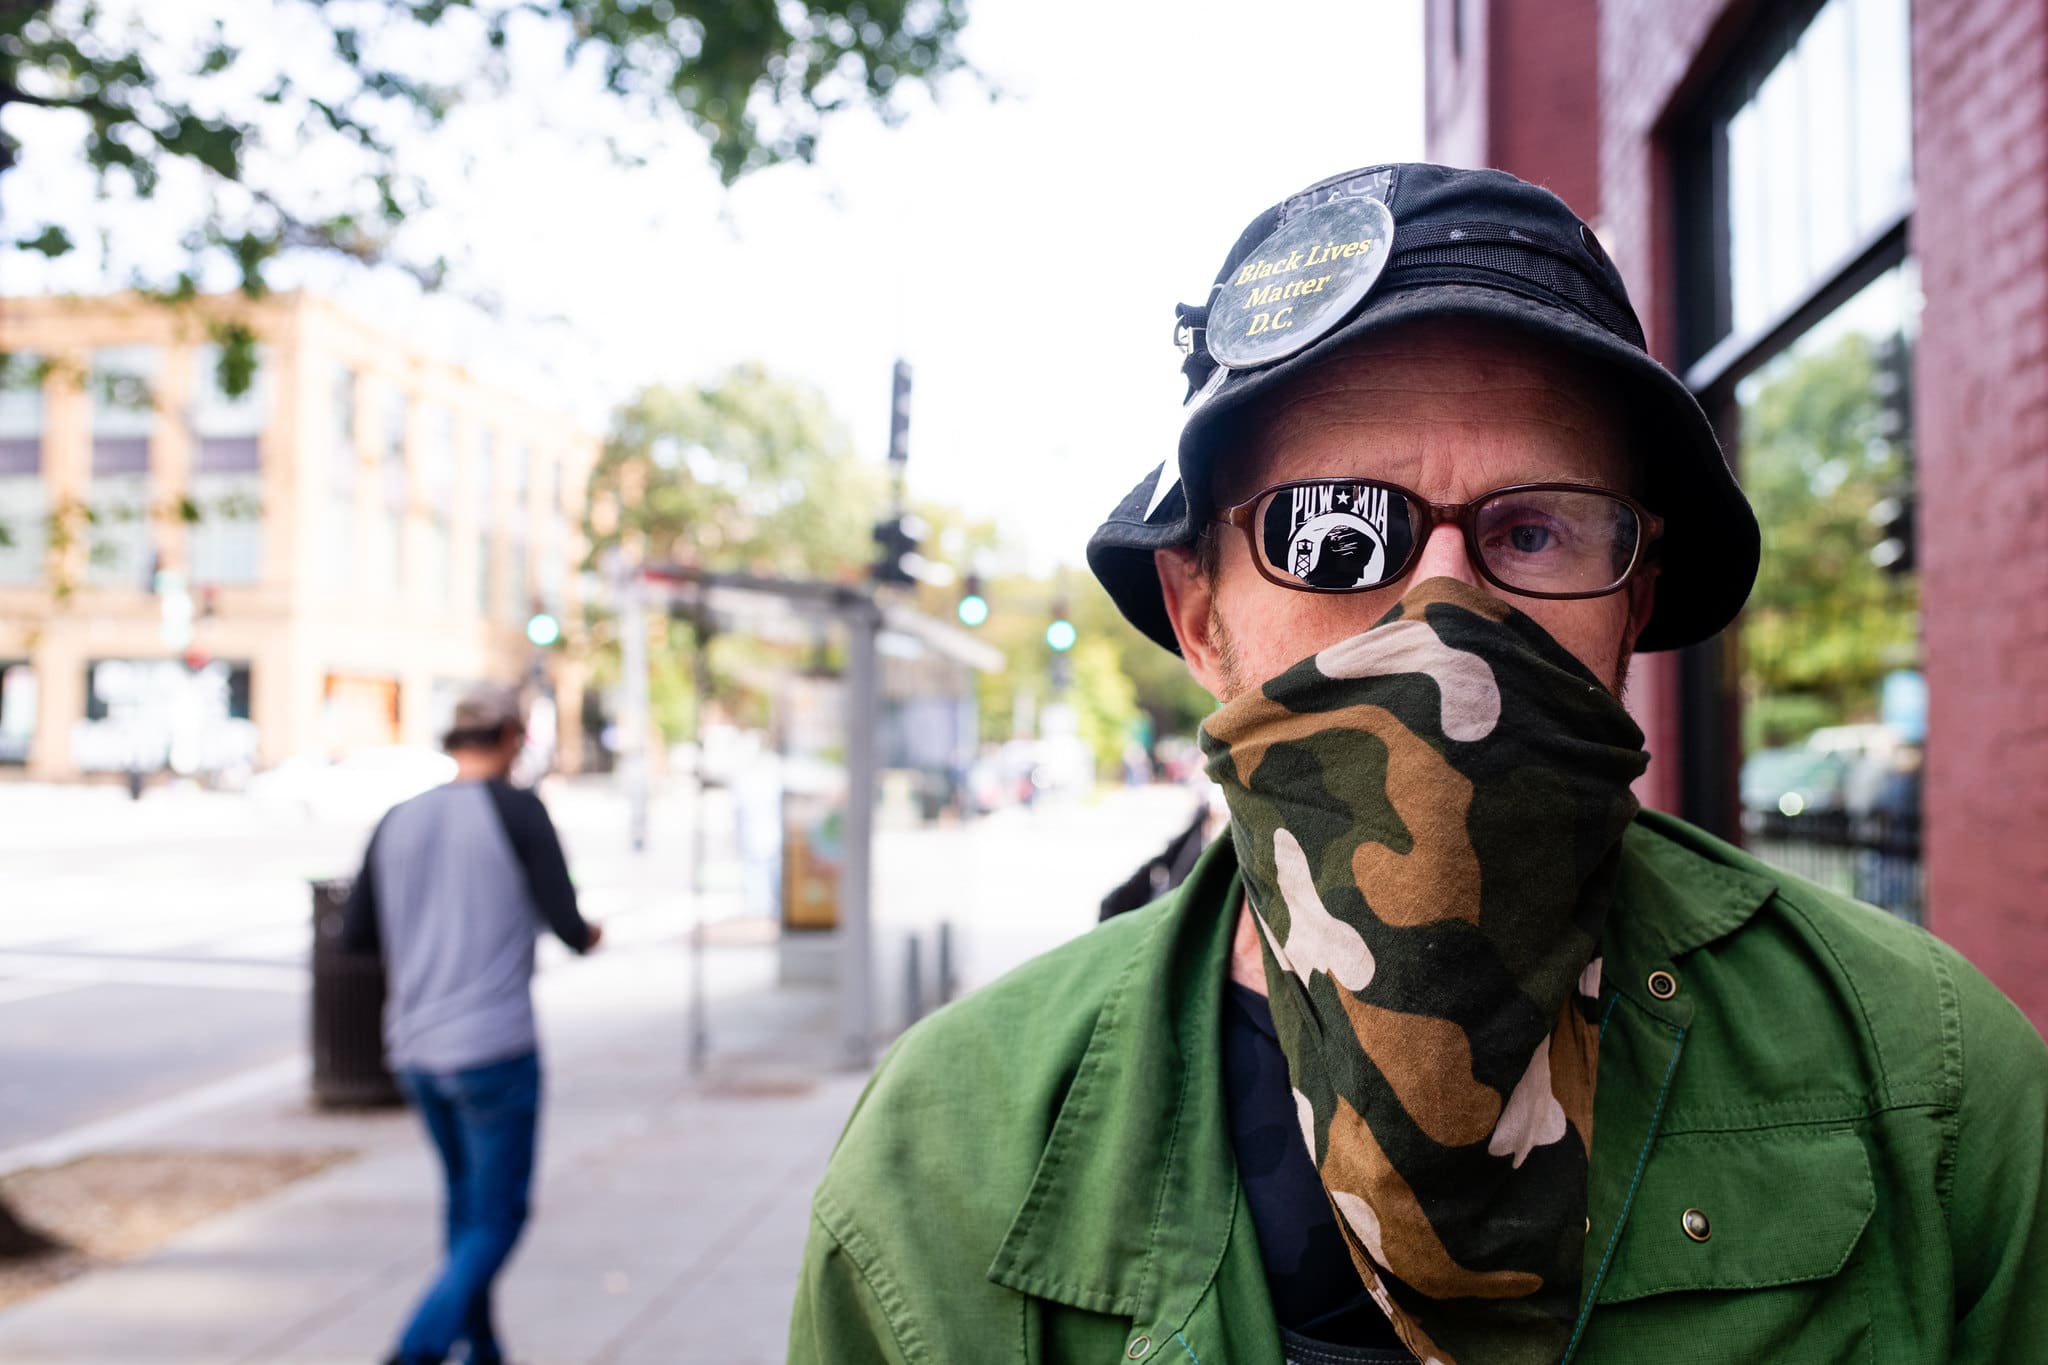 Close-up photo of Saul from the shoulders up. A bright streetscape is visible behind him. He's wearing a black bucket hat with a button that says "Black Lives Matter" along with a "Prisoner of War" flag eyepatch and using a camouflage-print bandana as a face mask.